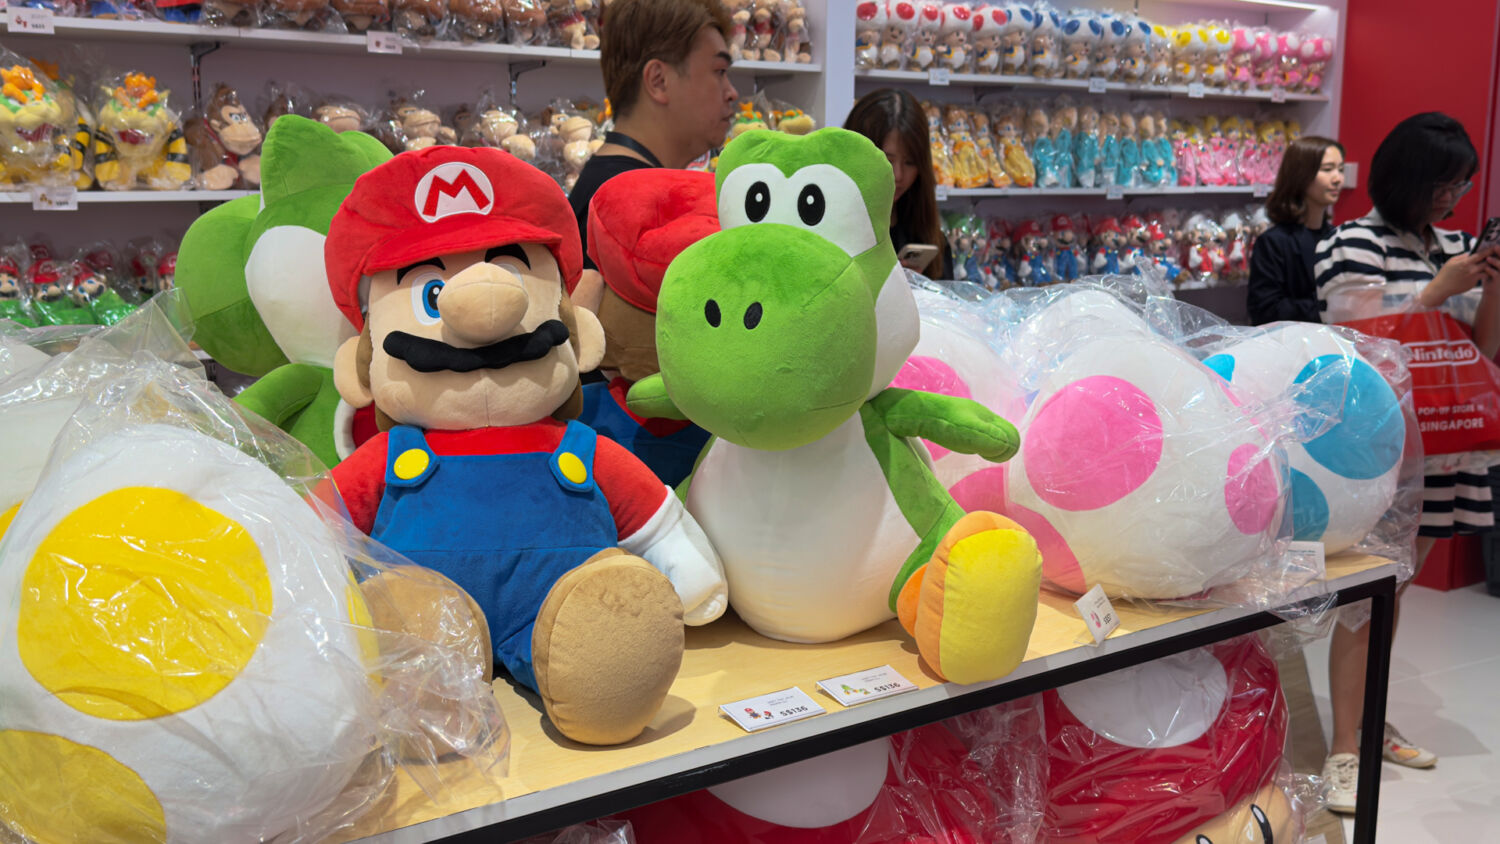 First Early Photos of Nintendo POP-UP STORE In Singapore – NintendoSoup